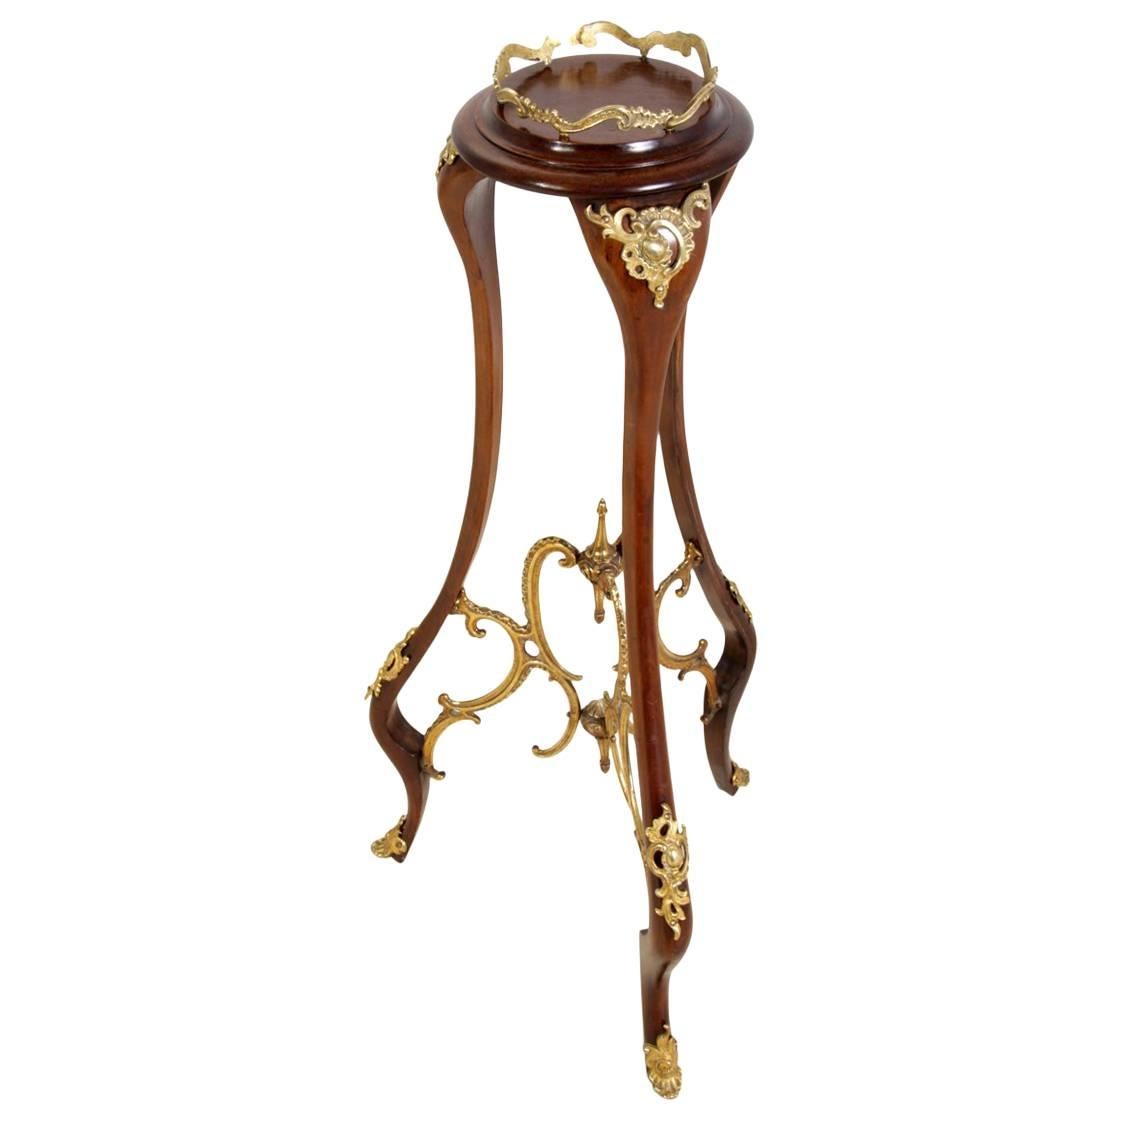 French Mahogany and Gilt Jardinière Stand, circa 1890